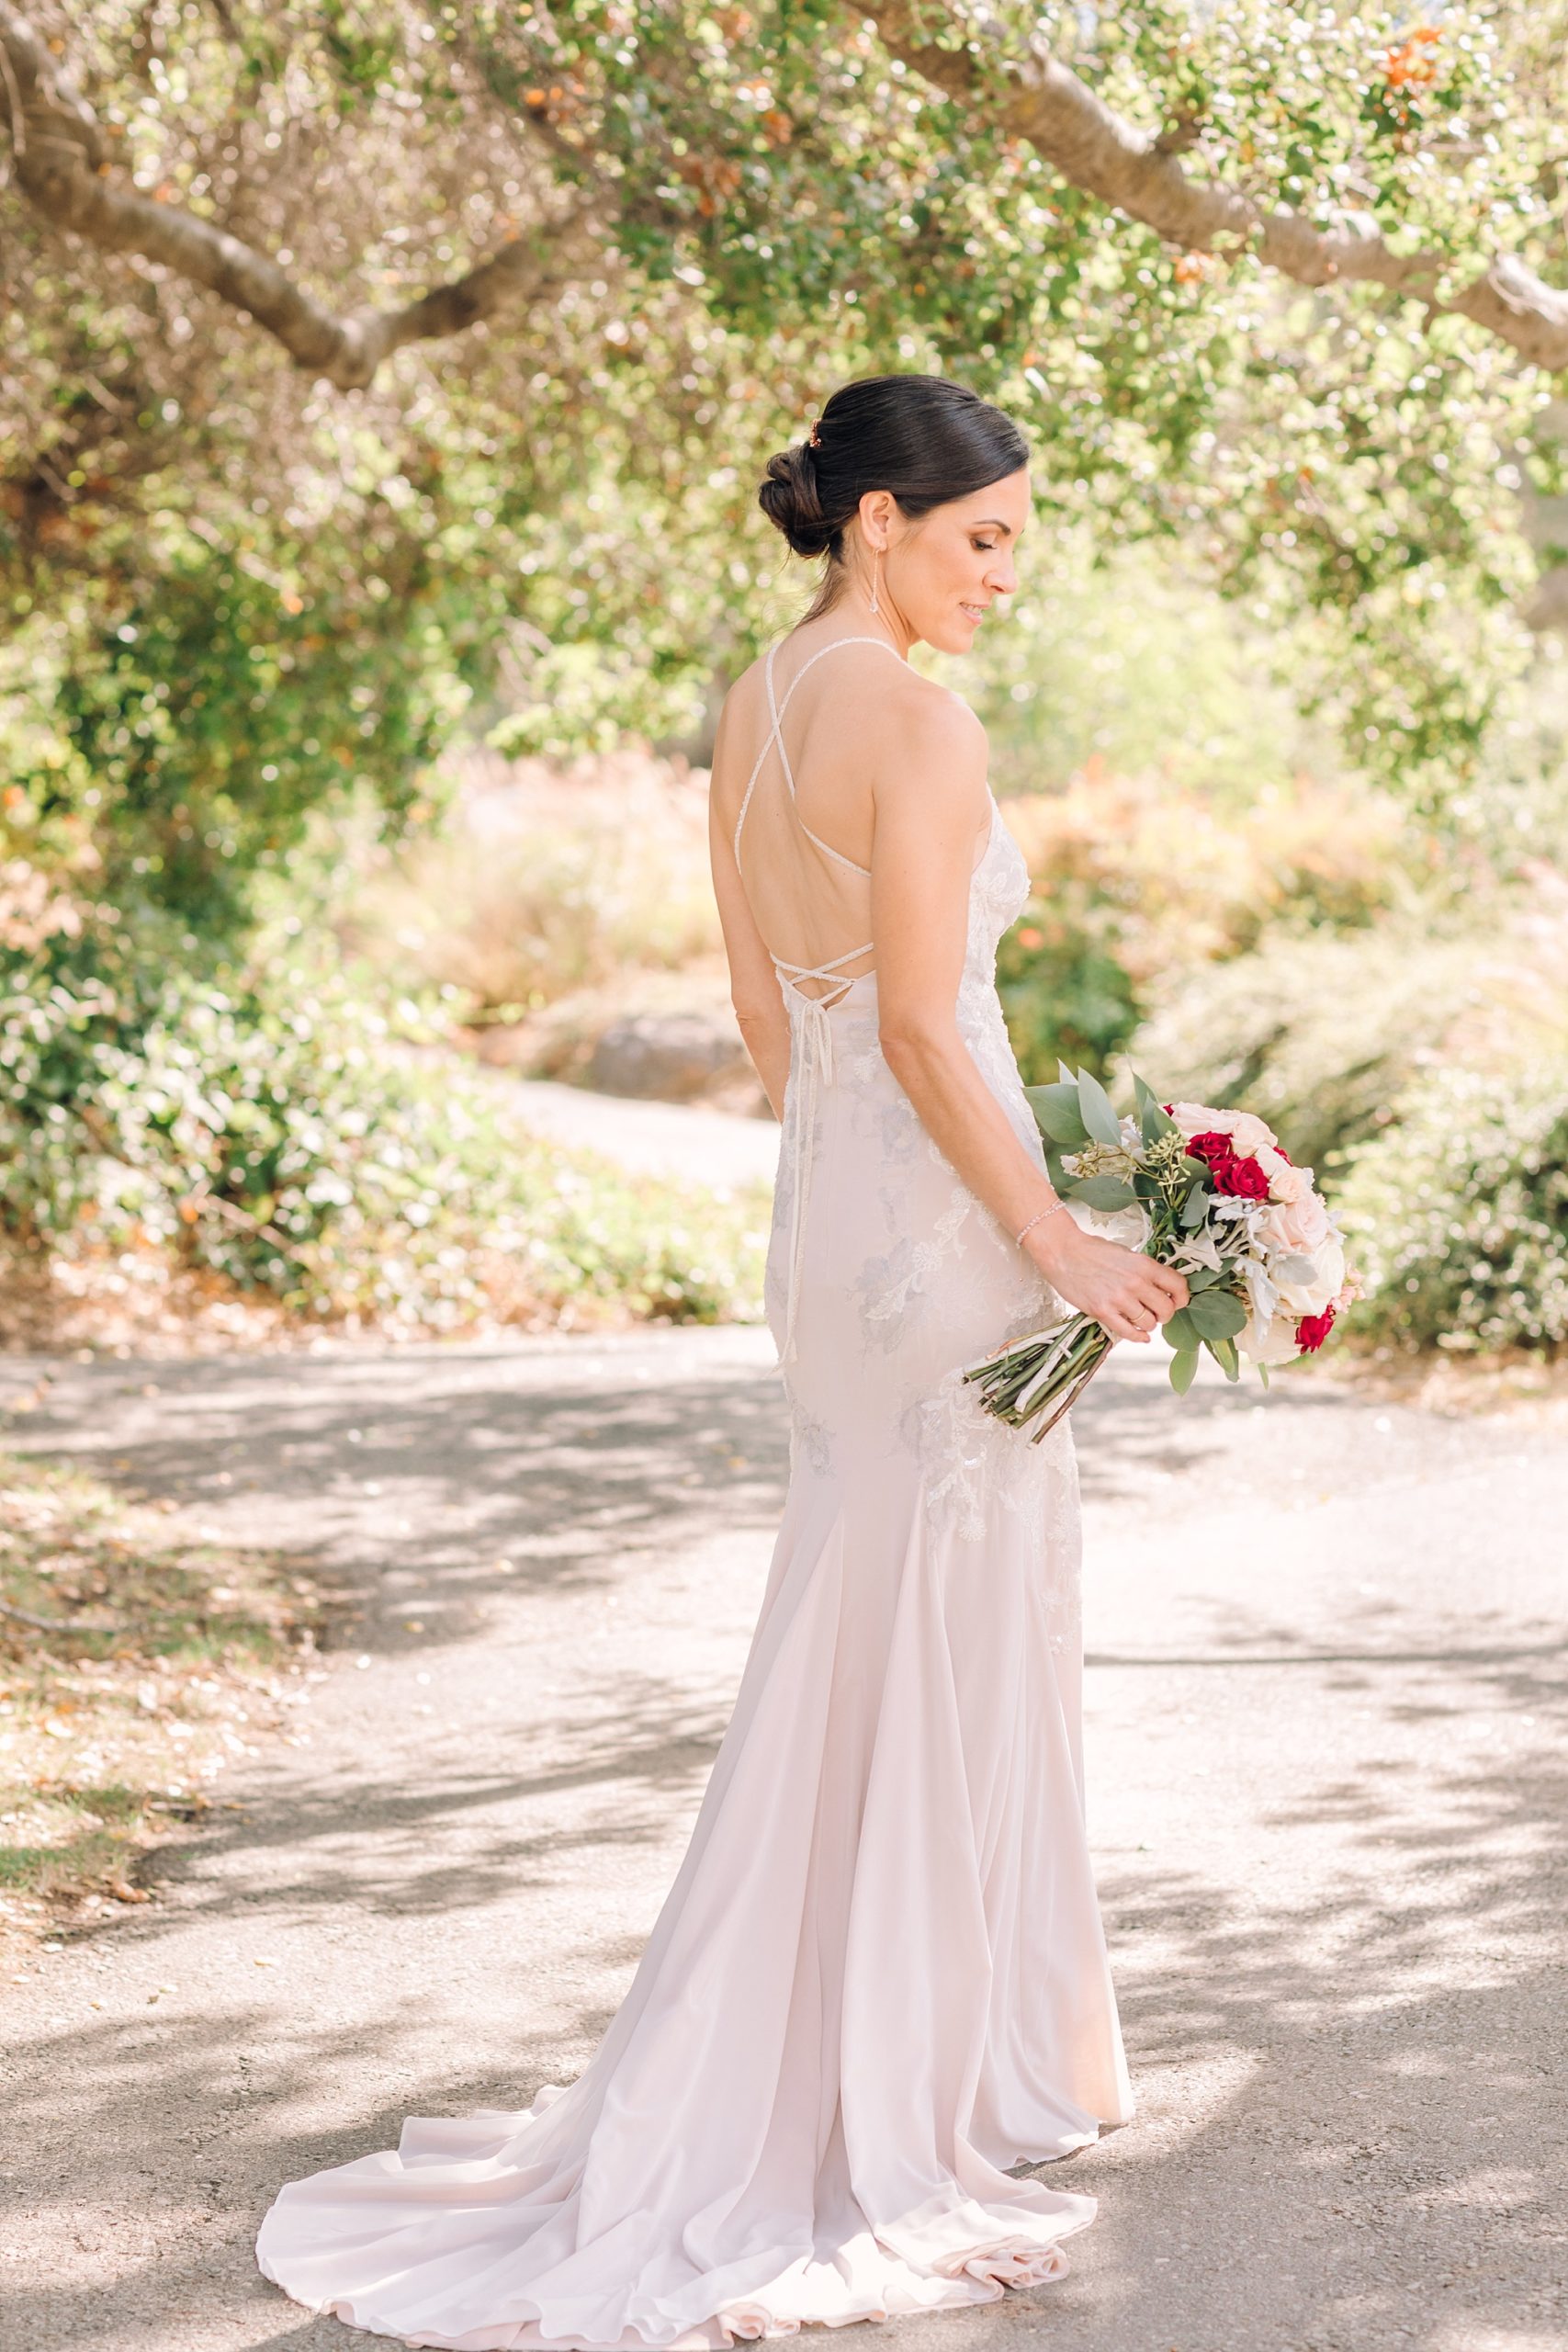 Courtney Stockton Photography, By your side events, marin wedding photographer, napa wedding photographer, sonoma wedding photographer, san francisco wedding photographer